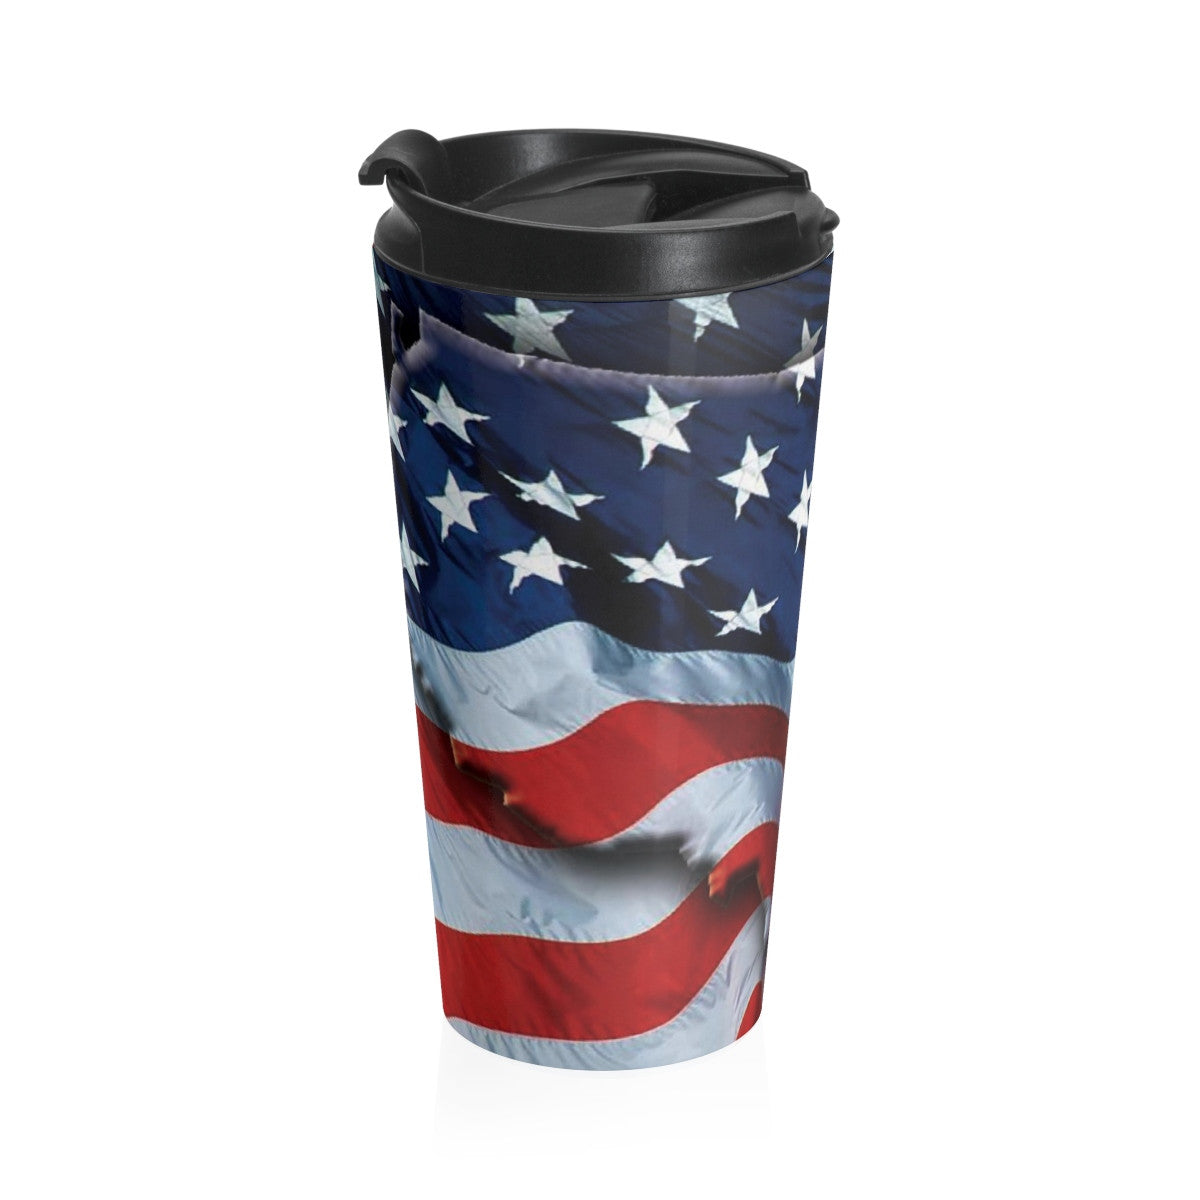 American Freedom Flag and Eagle Stainless Steel Travel Mug